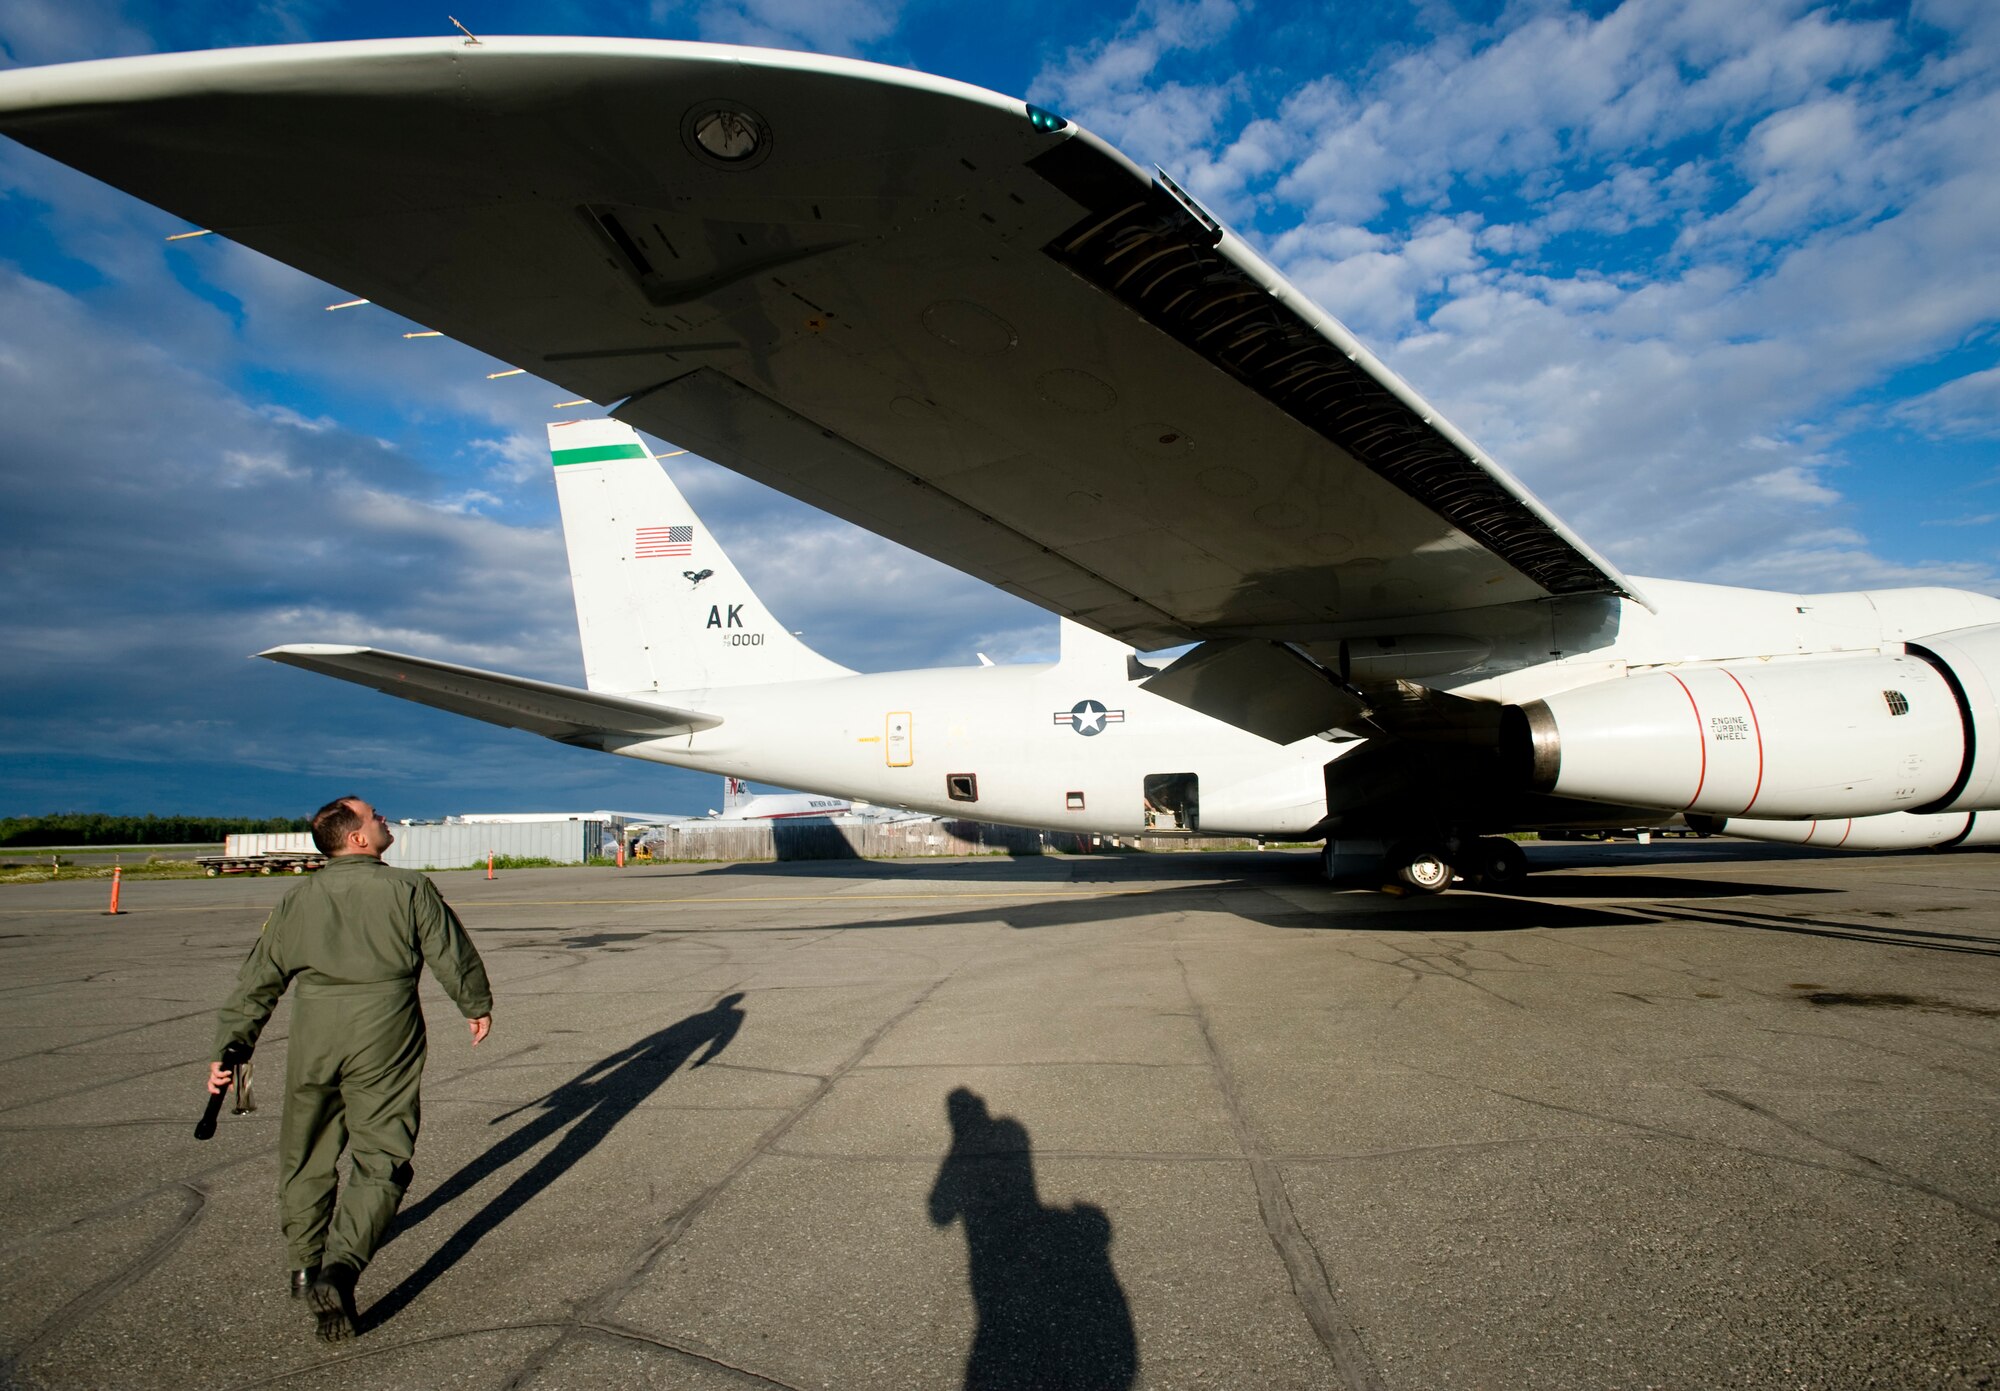 KULIS AIR NATIONAL GUARD BASE, Alaska -- Master Sgt. Scotty Shinall, 3rd Operations Group, inspects wings of an E-3 Sentry prior to take off August 7. The 962nd Airborne Air Control Squadron has been temporarily using Kulis' runways due to the closure of Elmendorf's main runway. The squadron has been assigned to Elmendorf since October 1992. (U.S. Air Force photo/Senior Airman Jonathan Steffen)